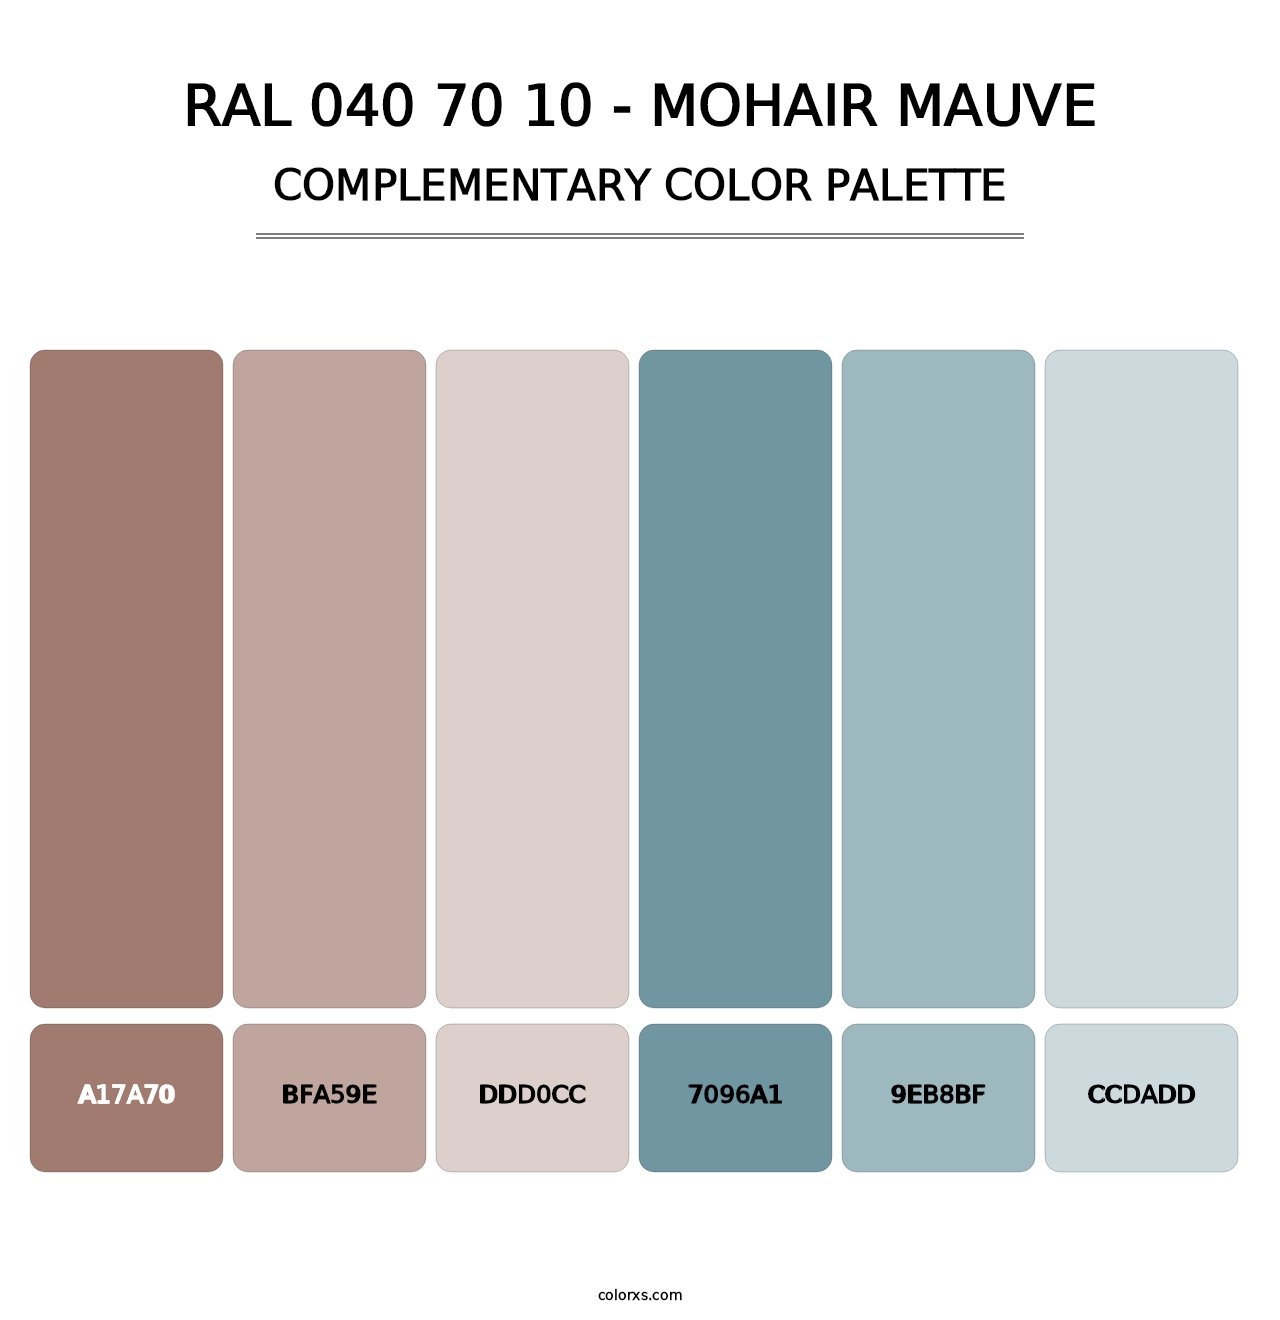 RAL 040 70 10 - Mohair Mauve - Complementary Color Palette